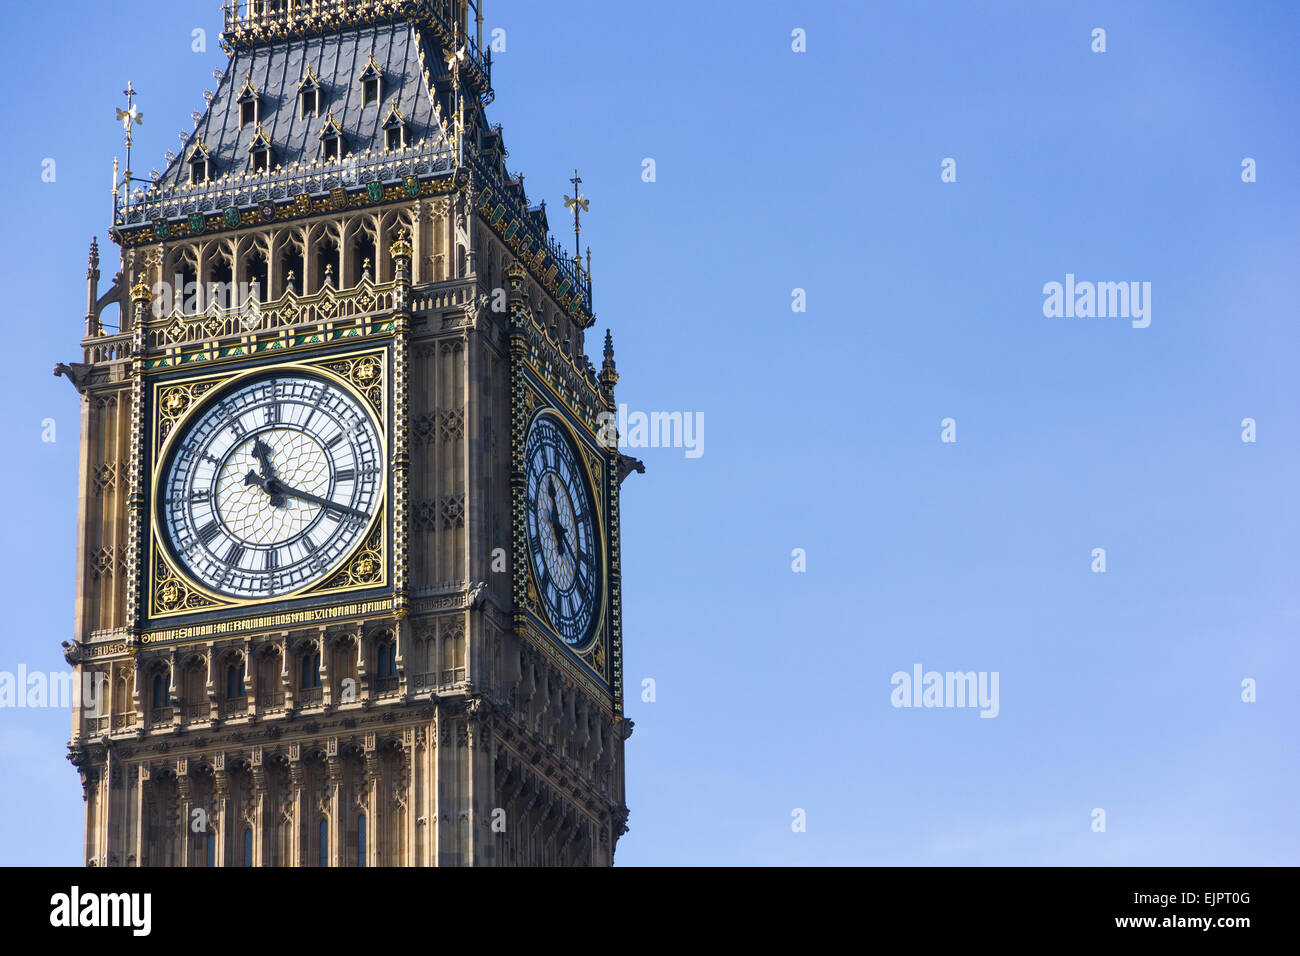 The clock face at the top of Elizabeth Tower, part of the Palace of Westminster in London, United Kingdom. Aka 'Big Ben' Stock Photo